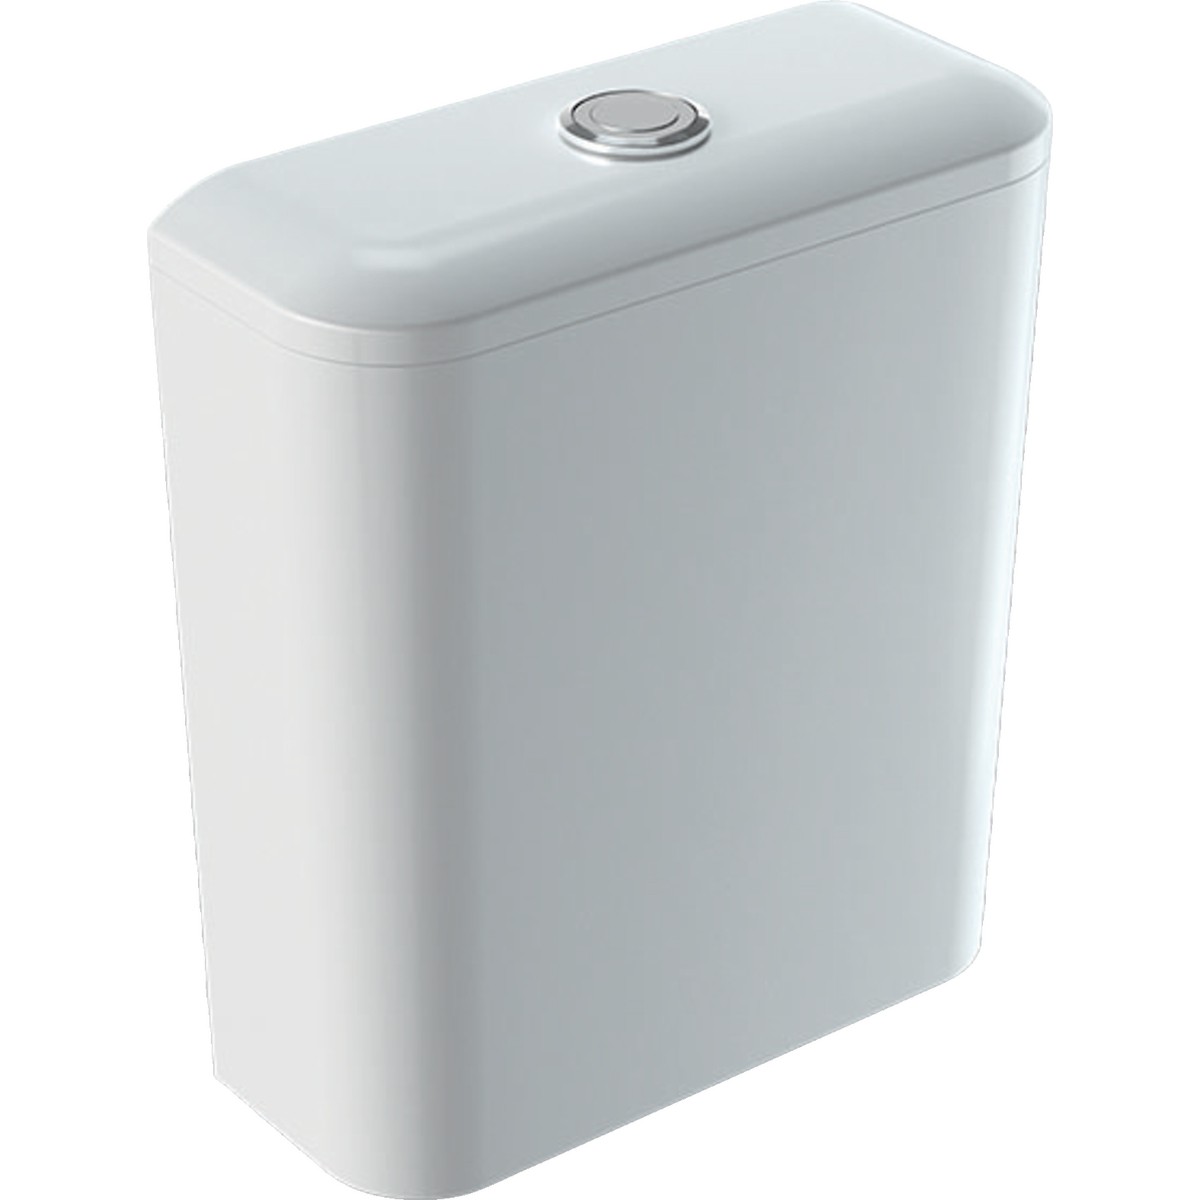 Geberit iCon Square Close coupled cistern - White [500411011] - (cistern only)